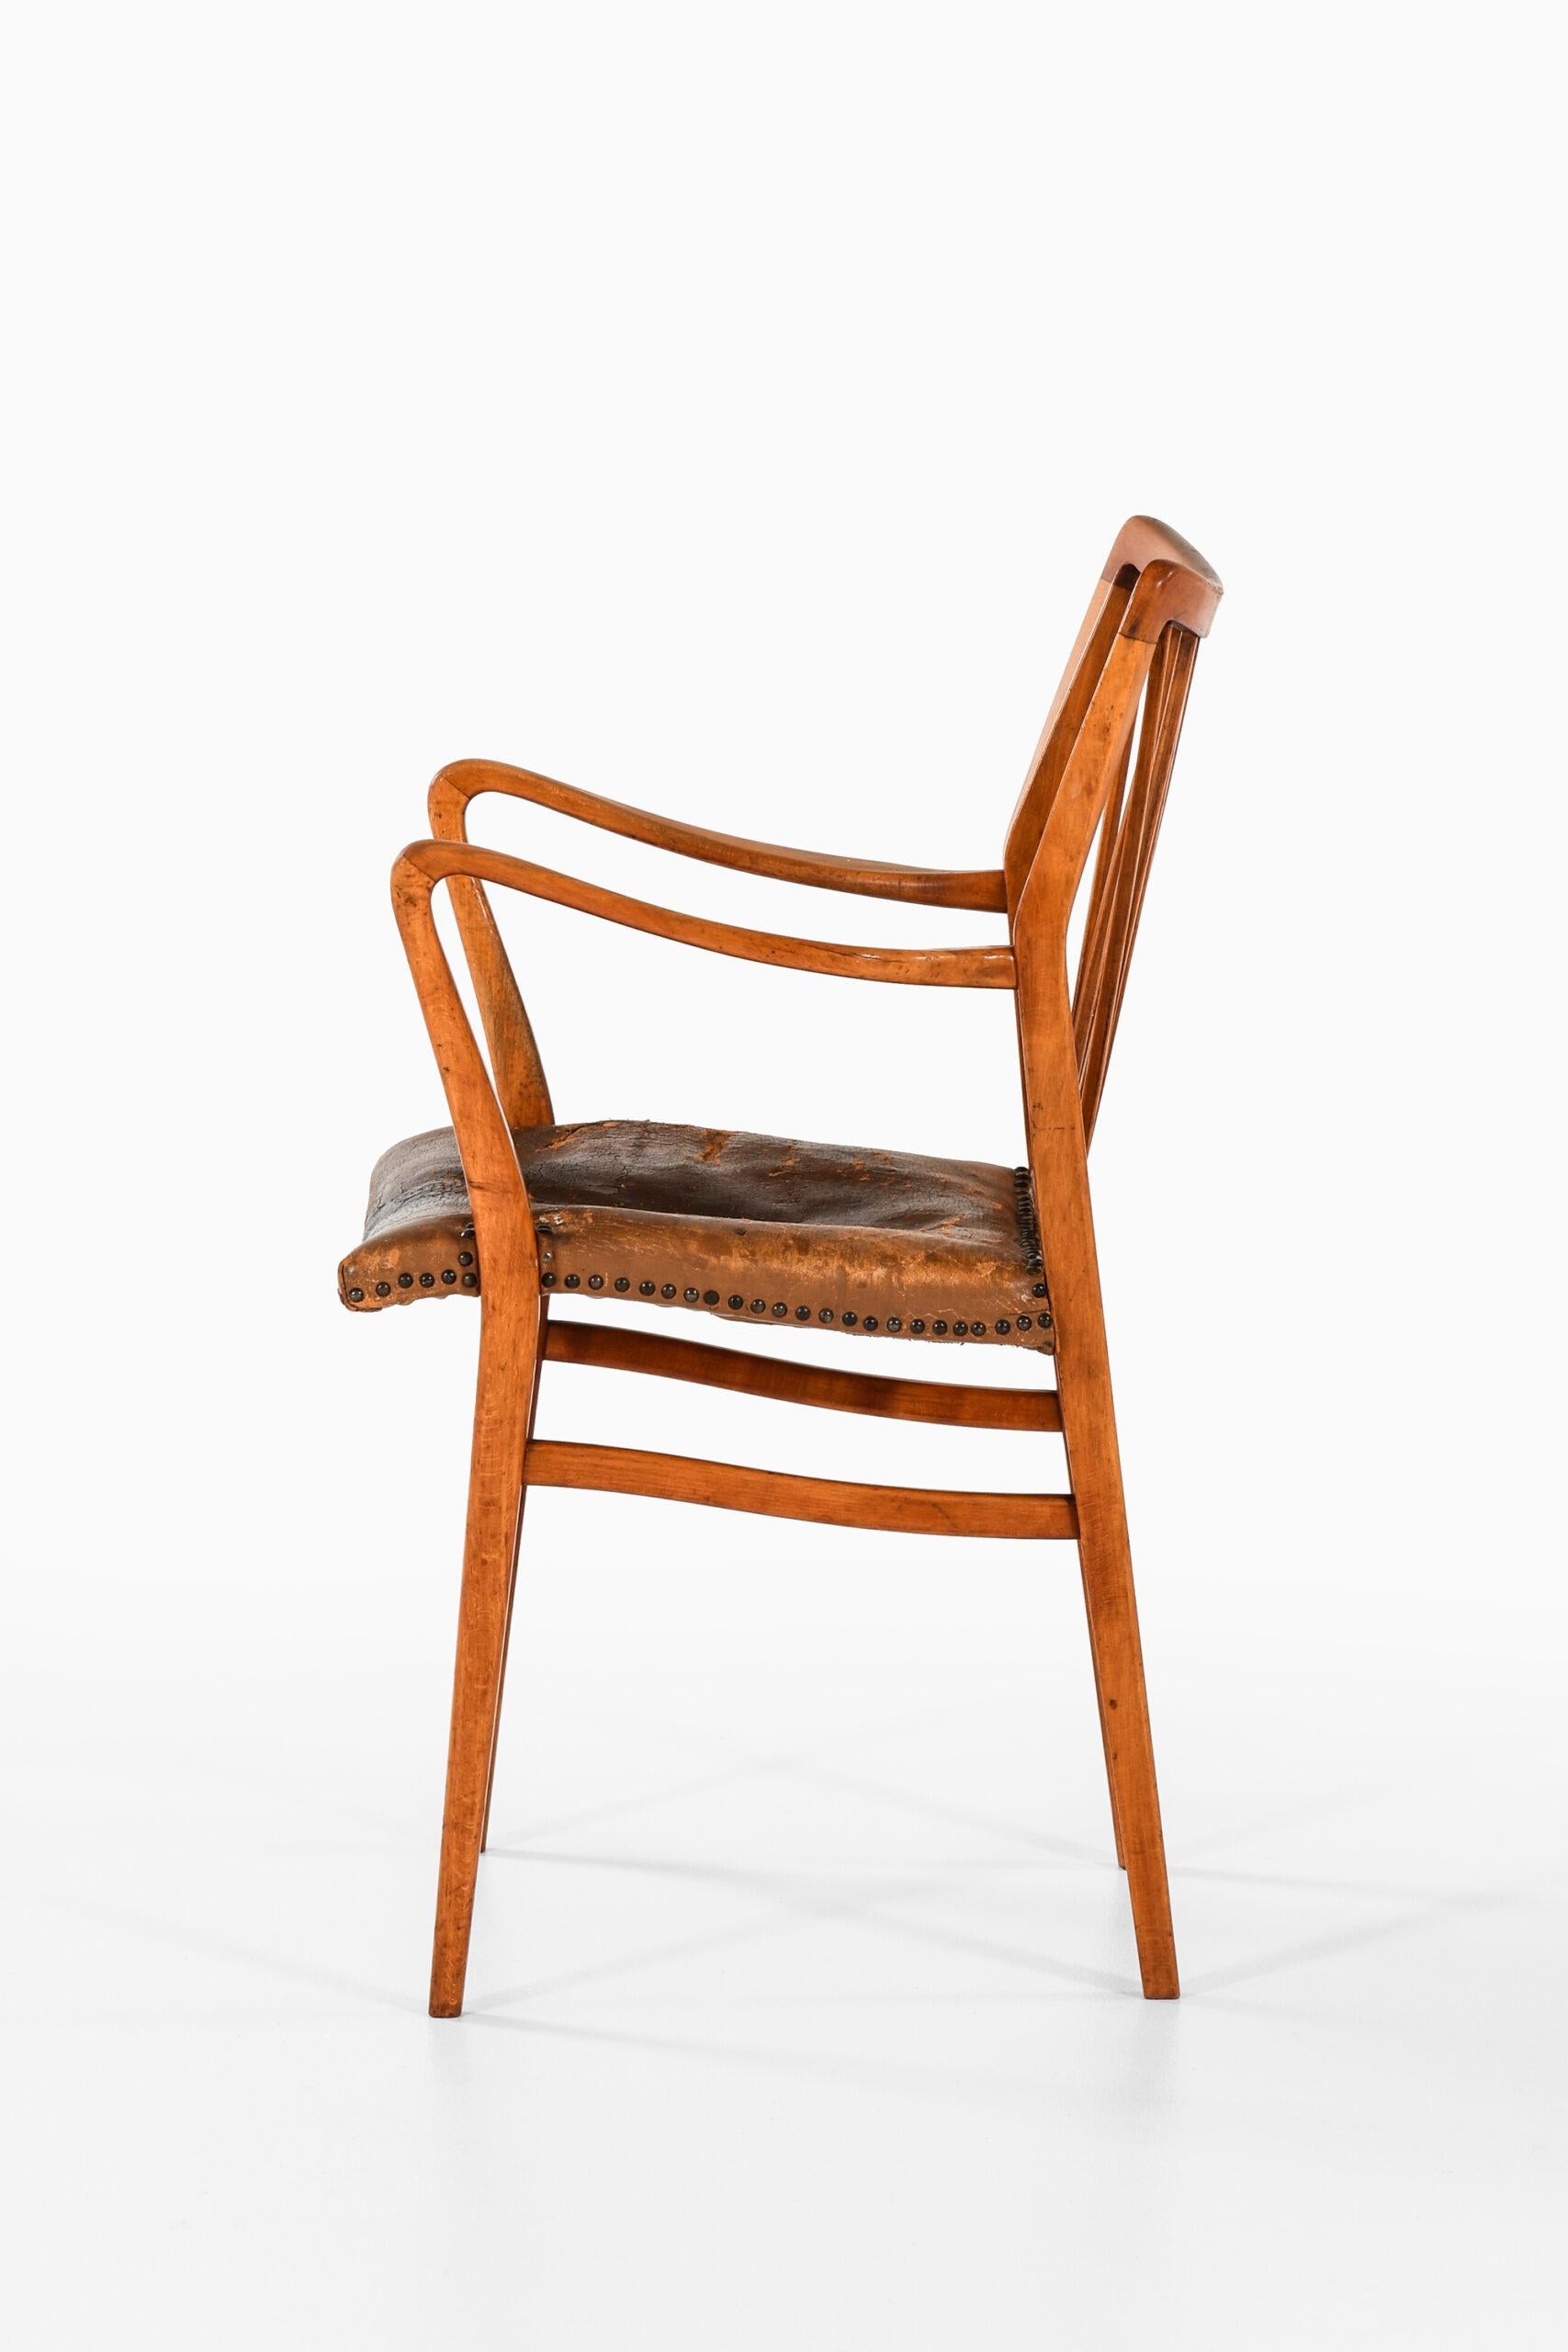 Swedish Armchair in the Manner of Axel Larsson Produced in Sweden For Sale